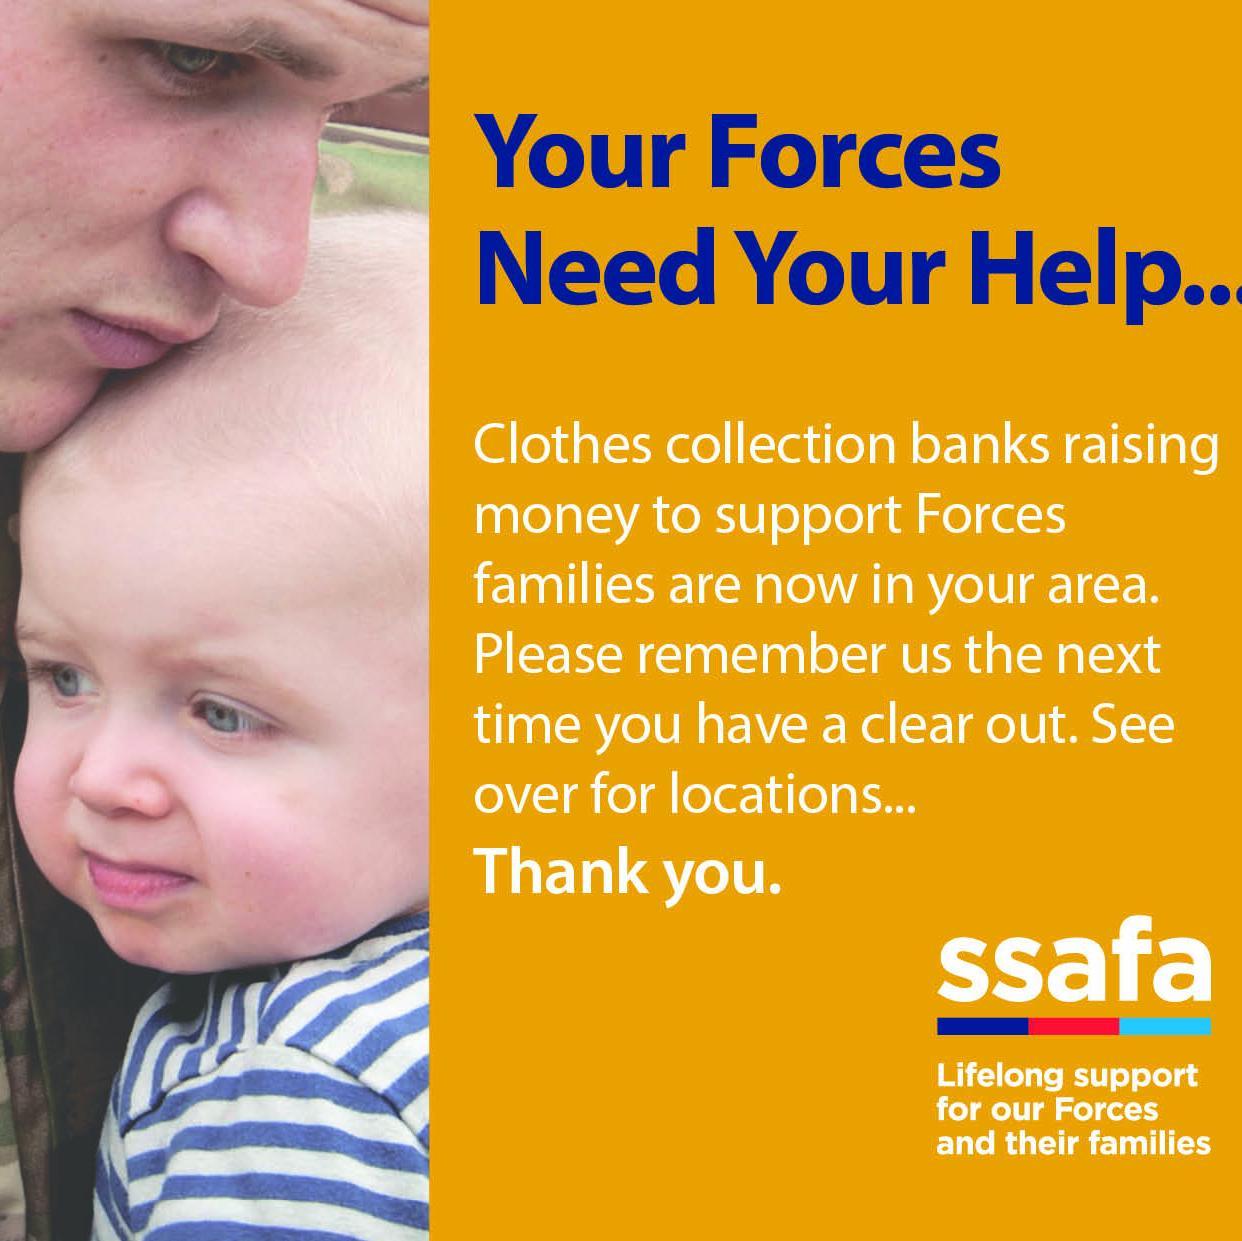 Textile Clothing Banks in Support of SSAFA